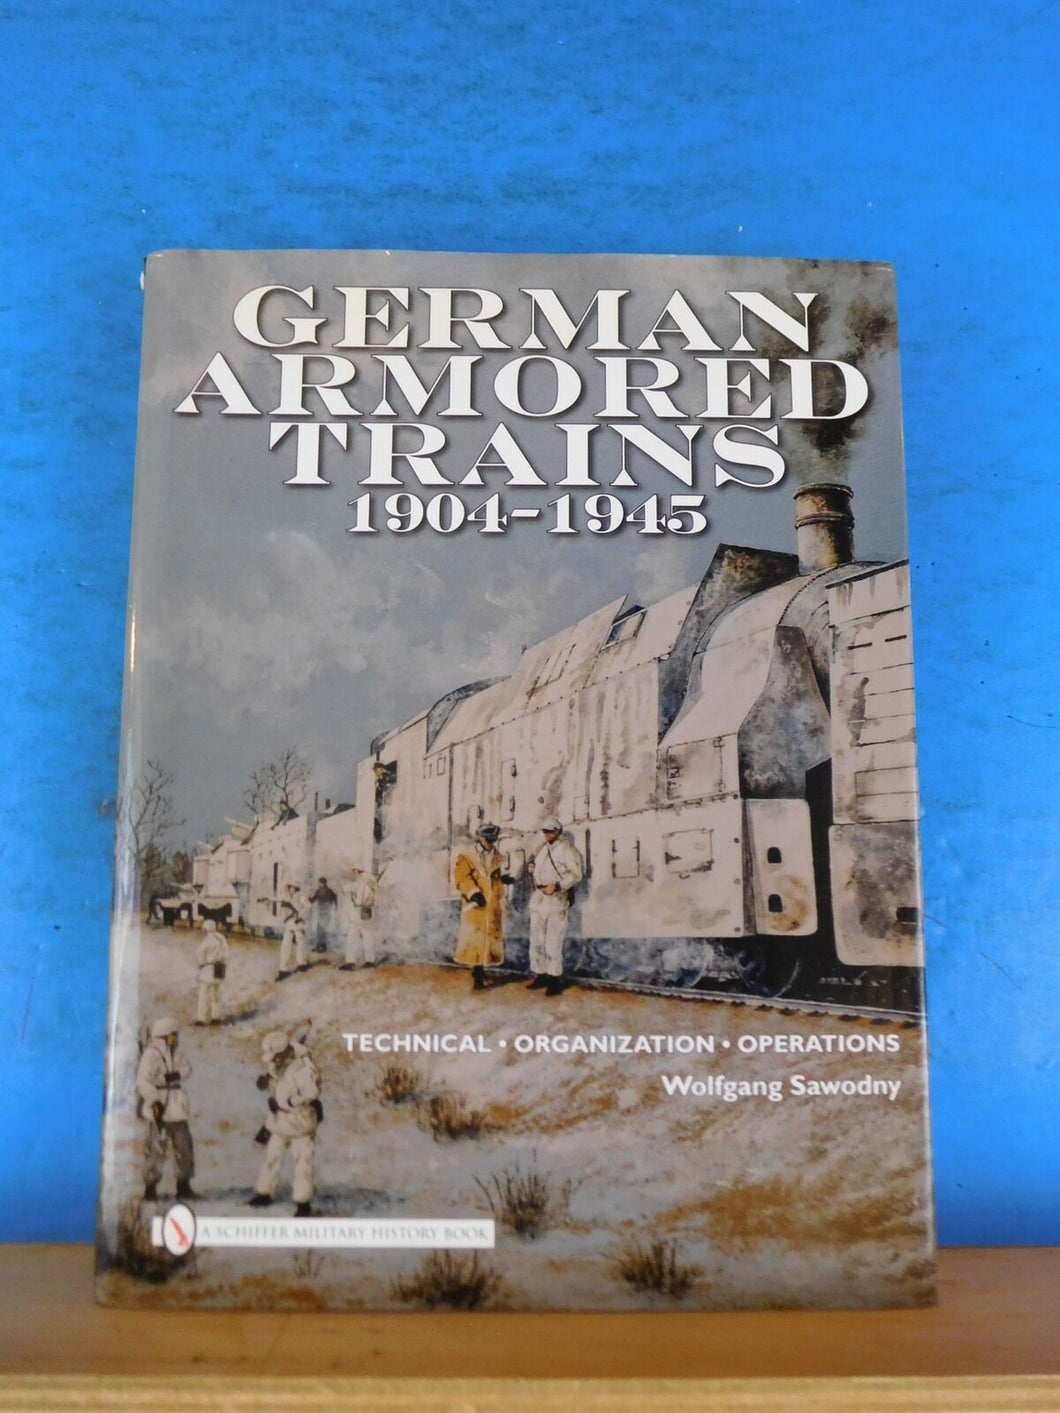 German Armored Trains 1904-1945 by Wolfgang Sawodny, a Schiffer Military History